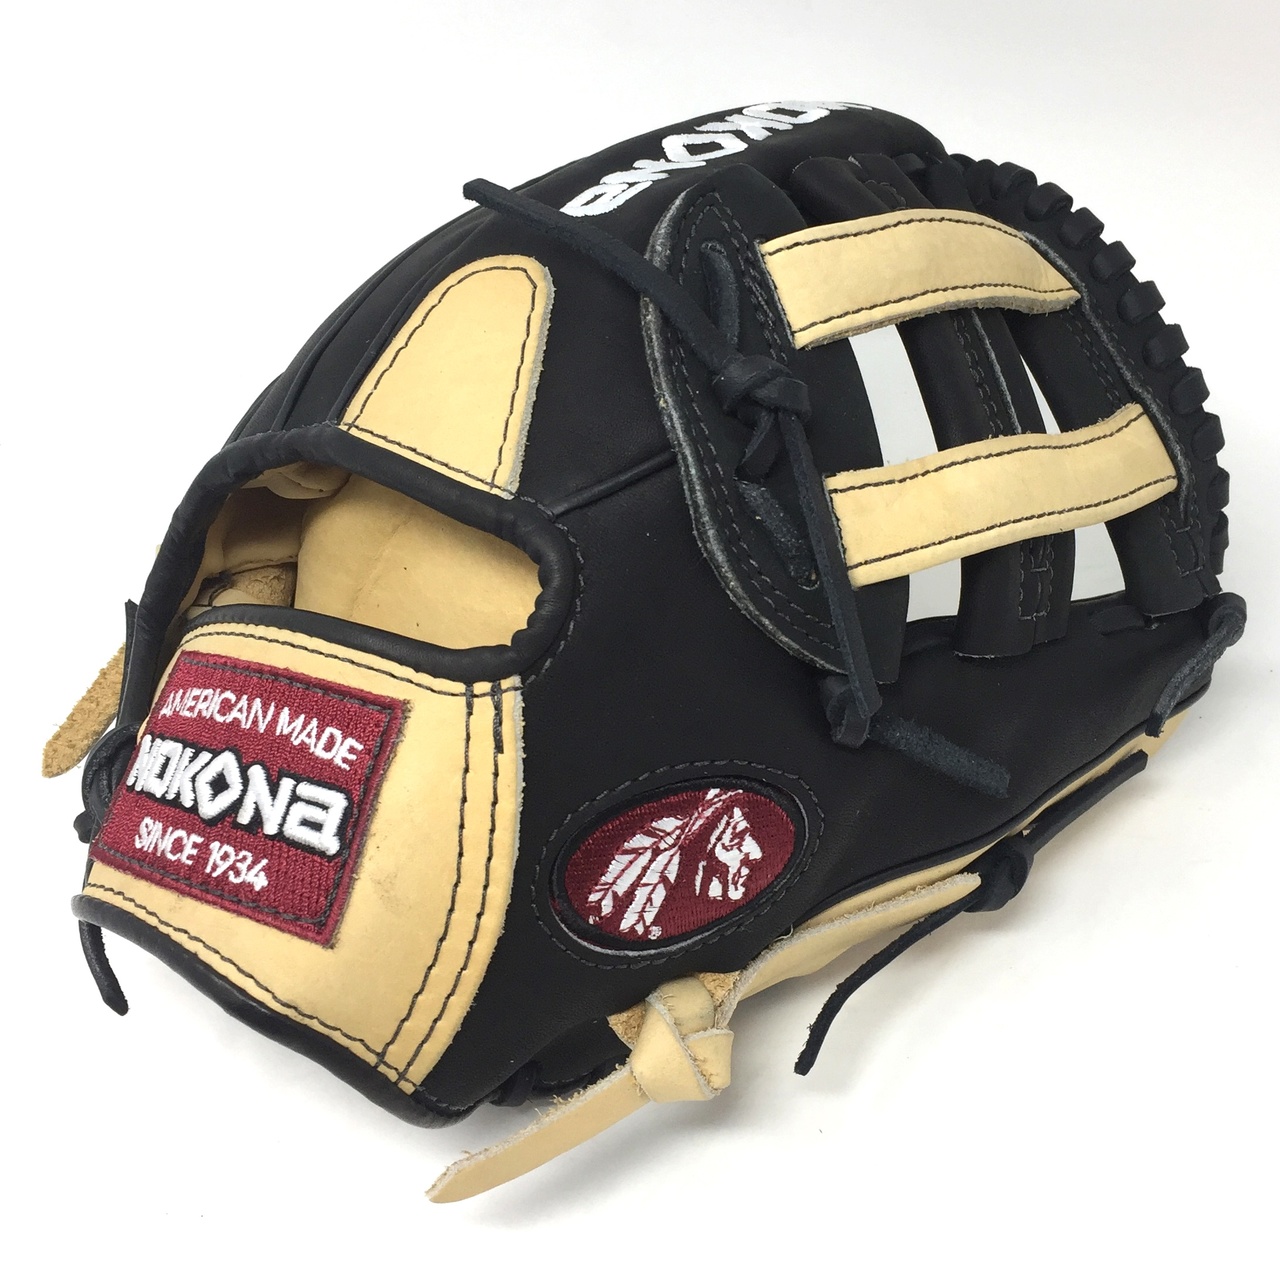 nokona-bison-black-alpha-baseball-glove-s-1150hb-11-5-right-hand-throw S-1150HB-RightHandThrow Nokona 808808893264 Young Adult Glove made of American Bison and Super soft Steerhide